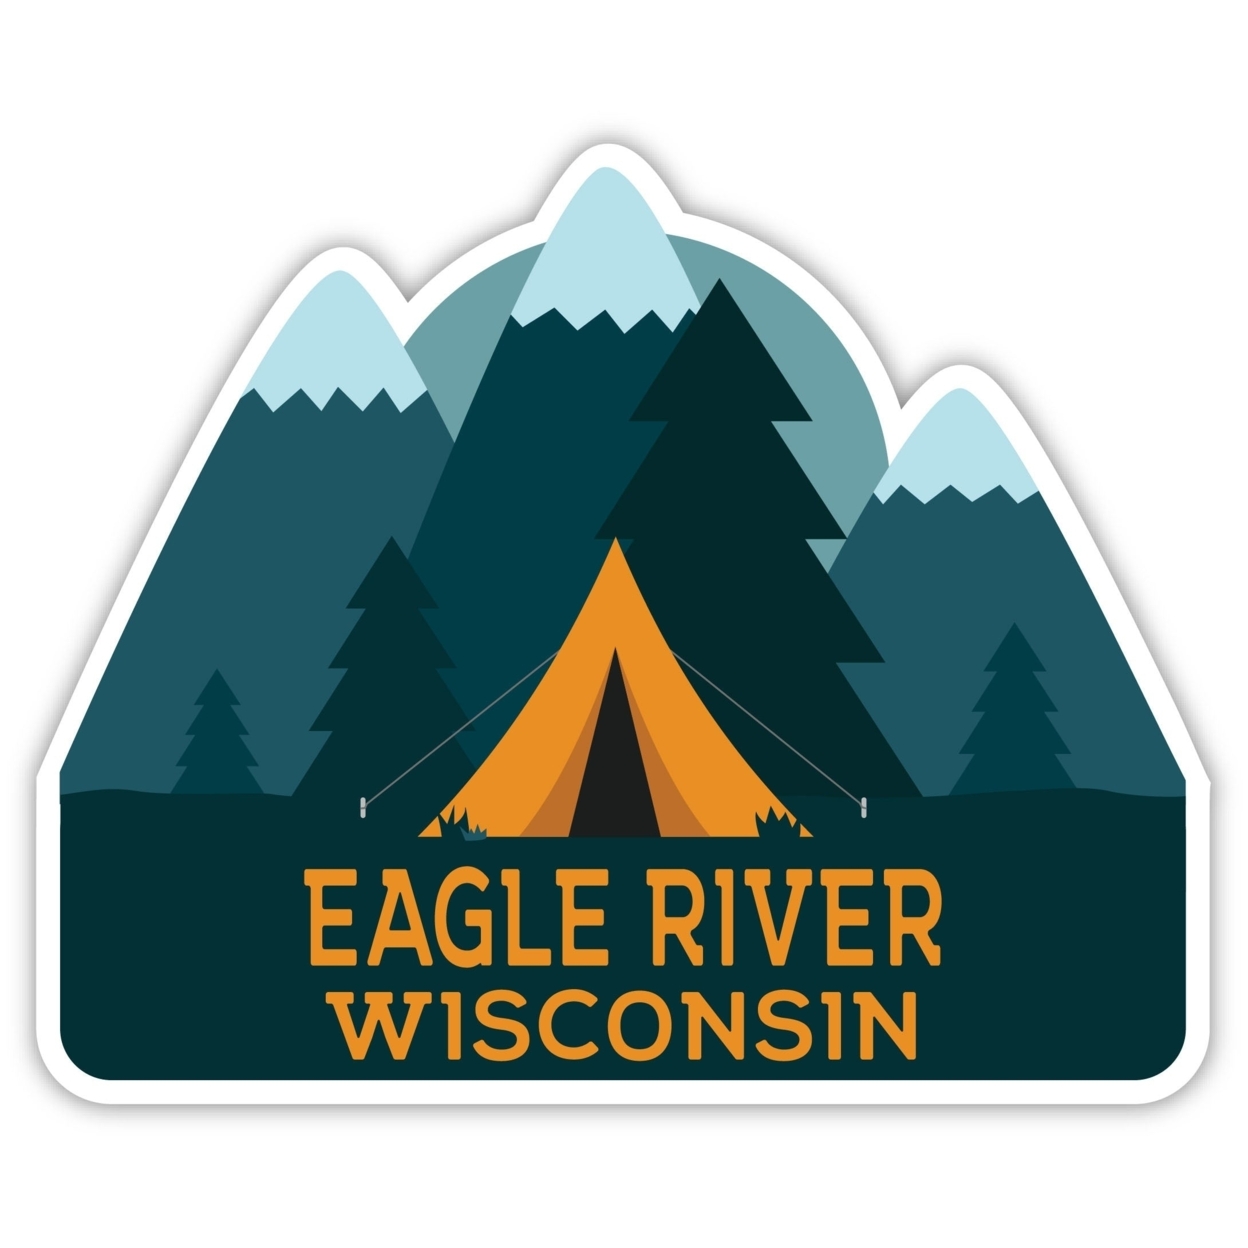 Eagle River Wisconsin Souvenir Decorative Stickers (Choose Theme And Size) - 4-Pack, 8-Inch, Tent